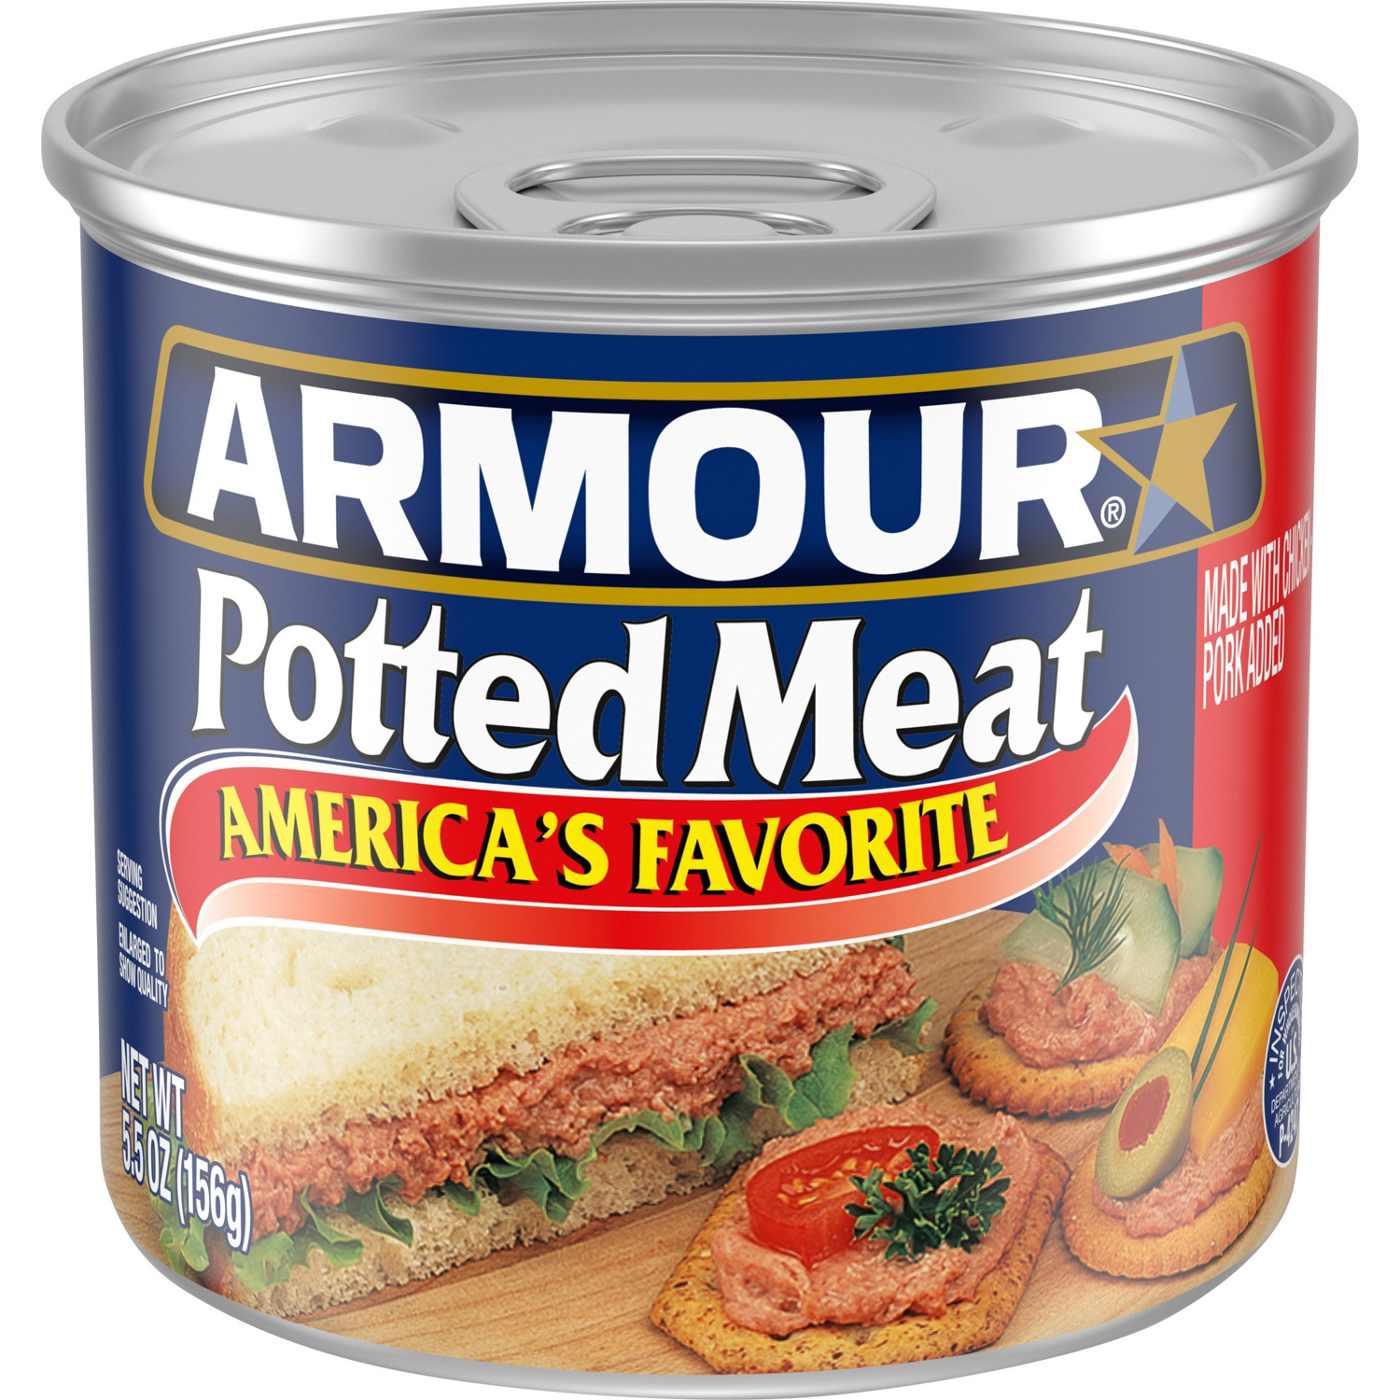 Armour Potted Meat At H E B